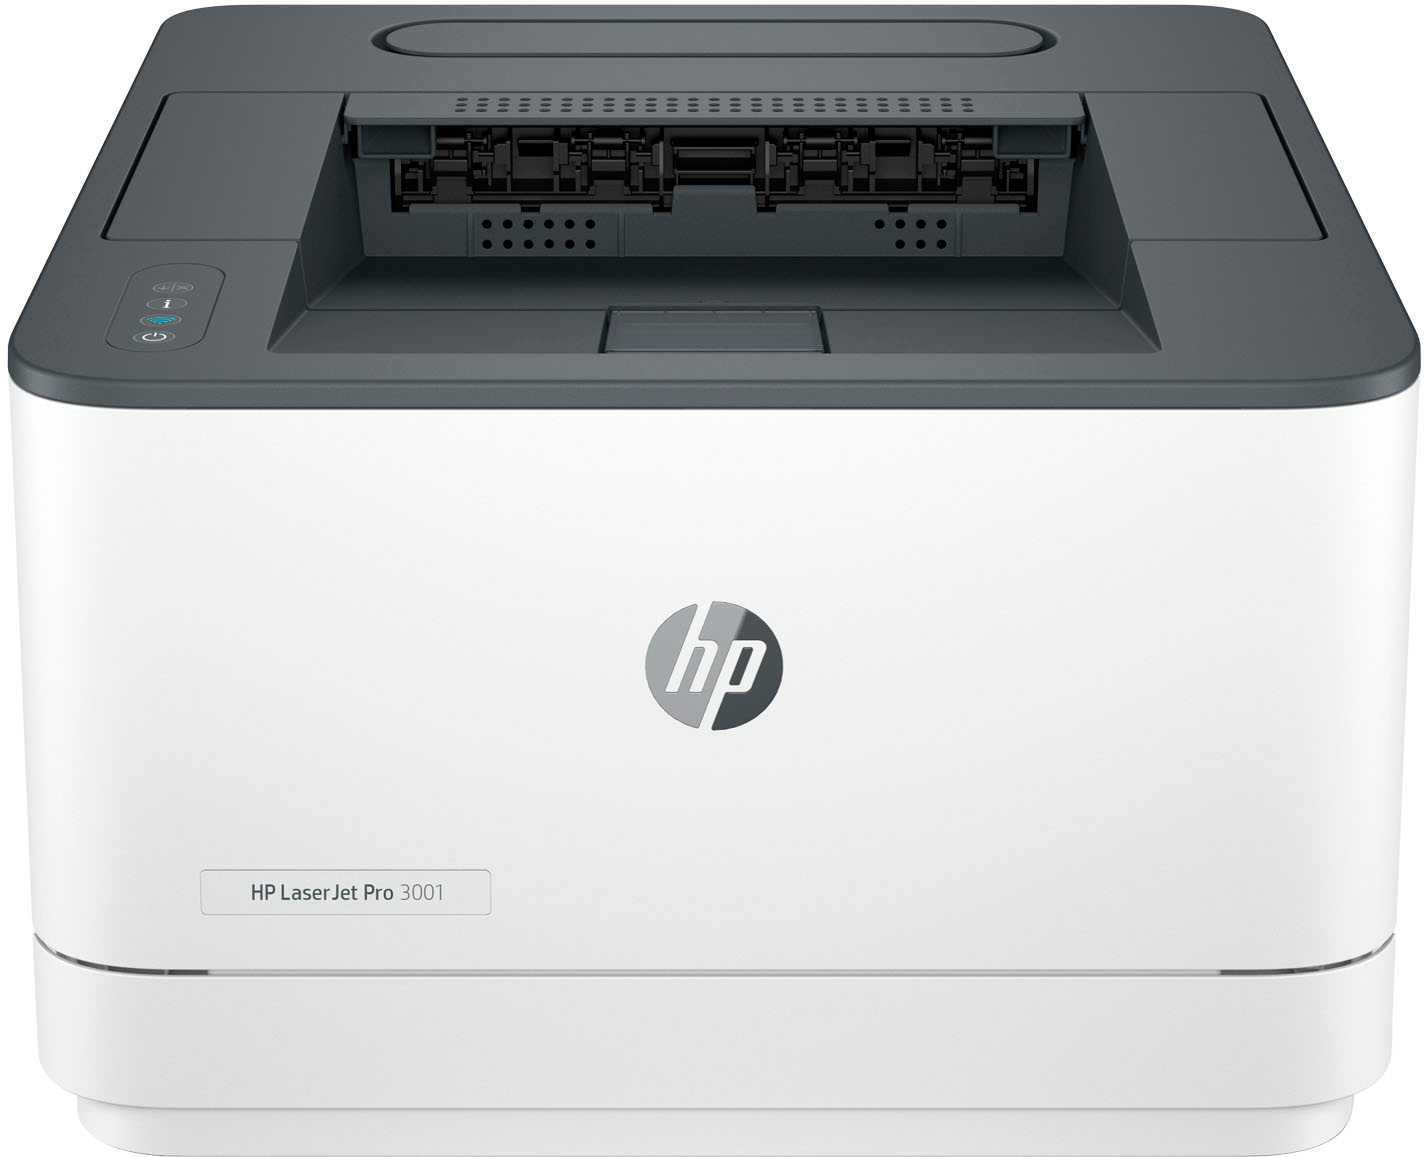 HP LaserJet Pro 3001dwe Wireless Black-and-White Laser Printer with months of Instant Ink included with HP+ White LaserJet Pro 3001dwe - Best Buy